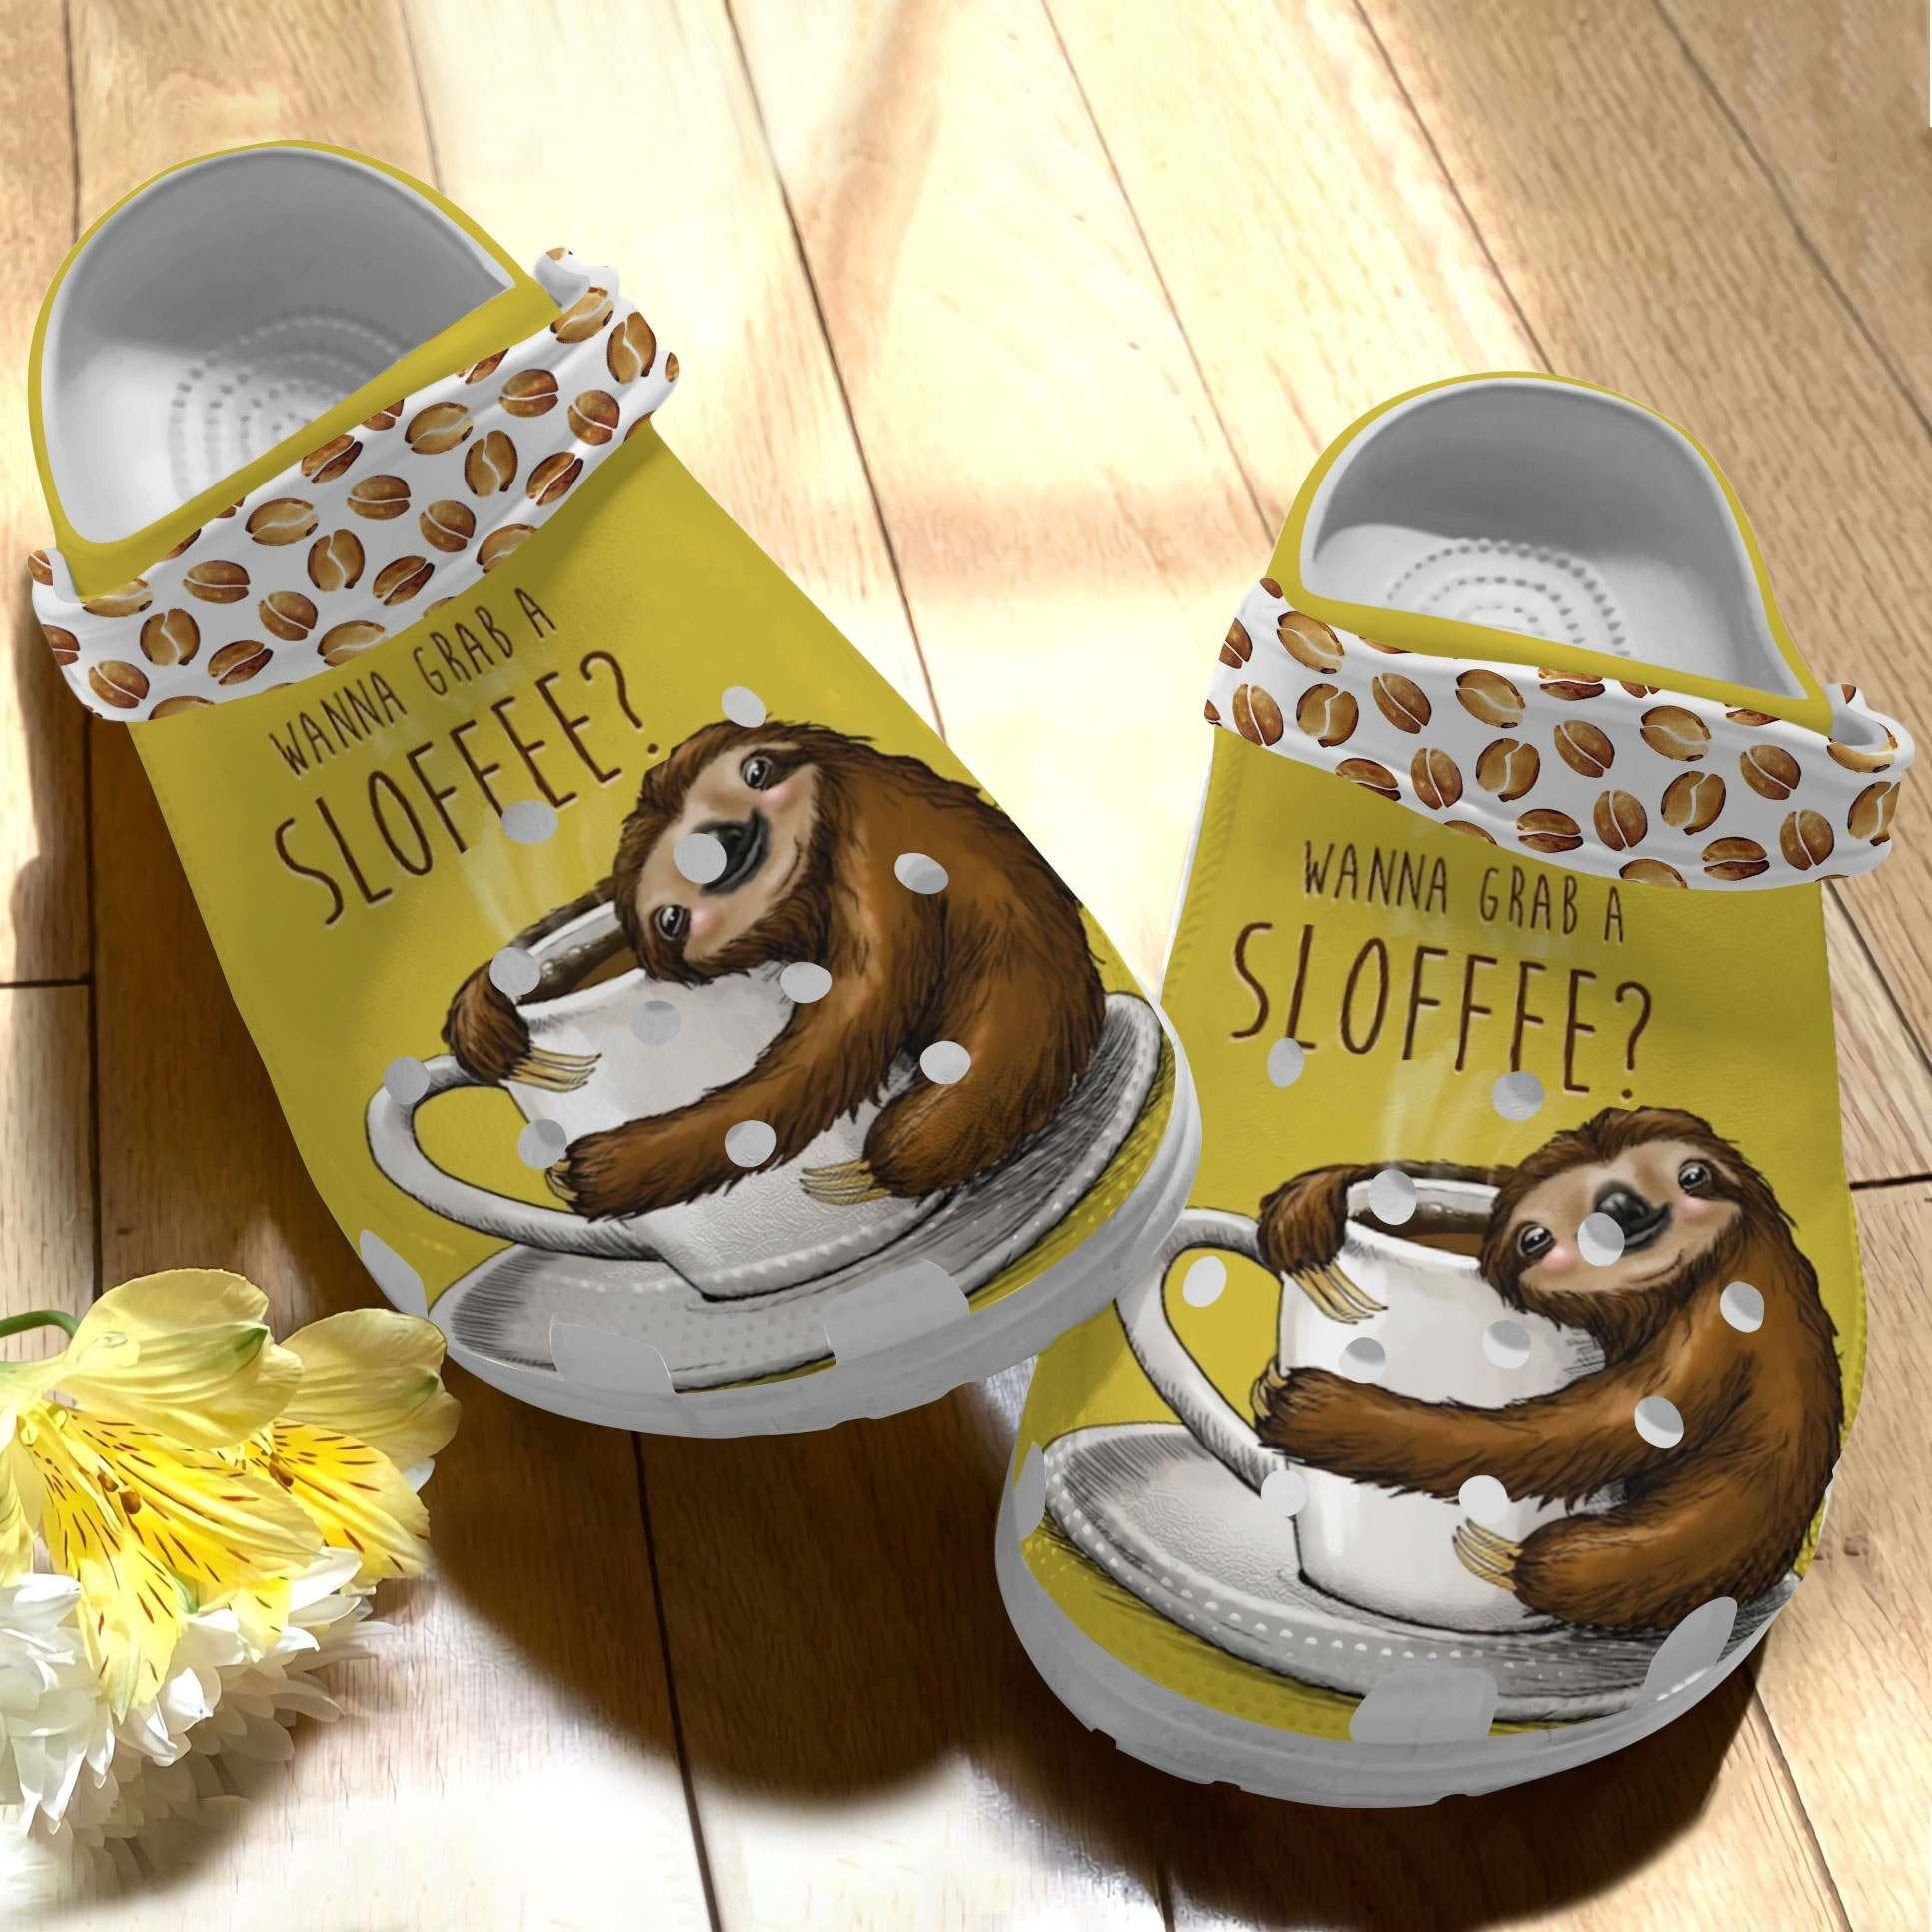 Wanna Grab A Sloffee Shoes - Cute Sloth Crocs Clogs Birthday Gift For Children Kids